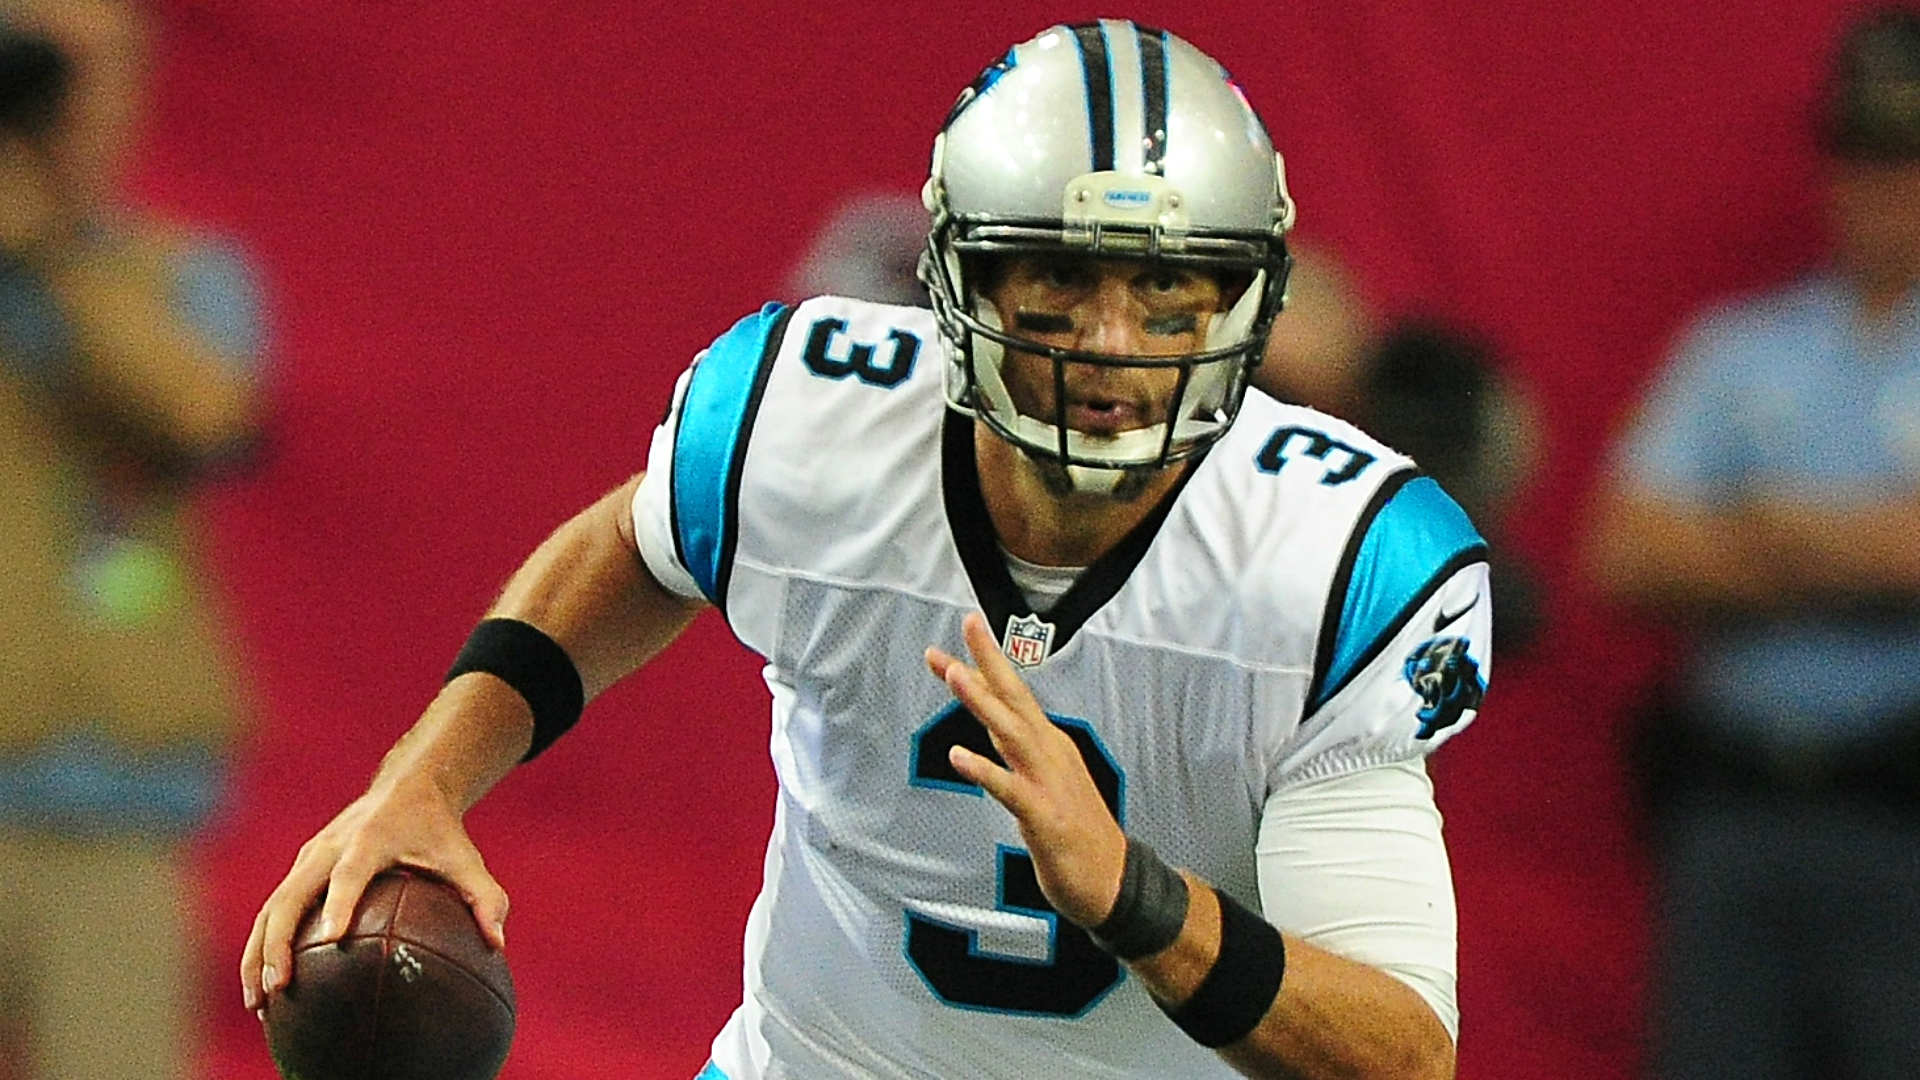 Business as usual for Panthers offense without Cam Newton. NFL